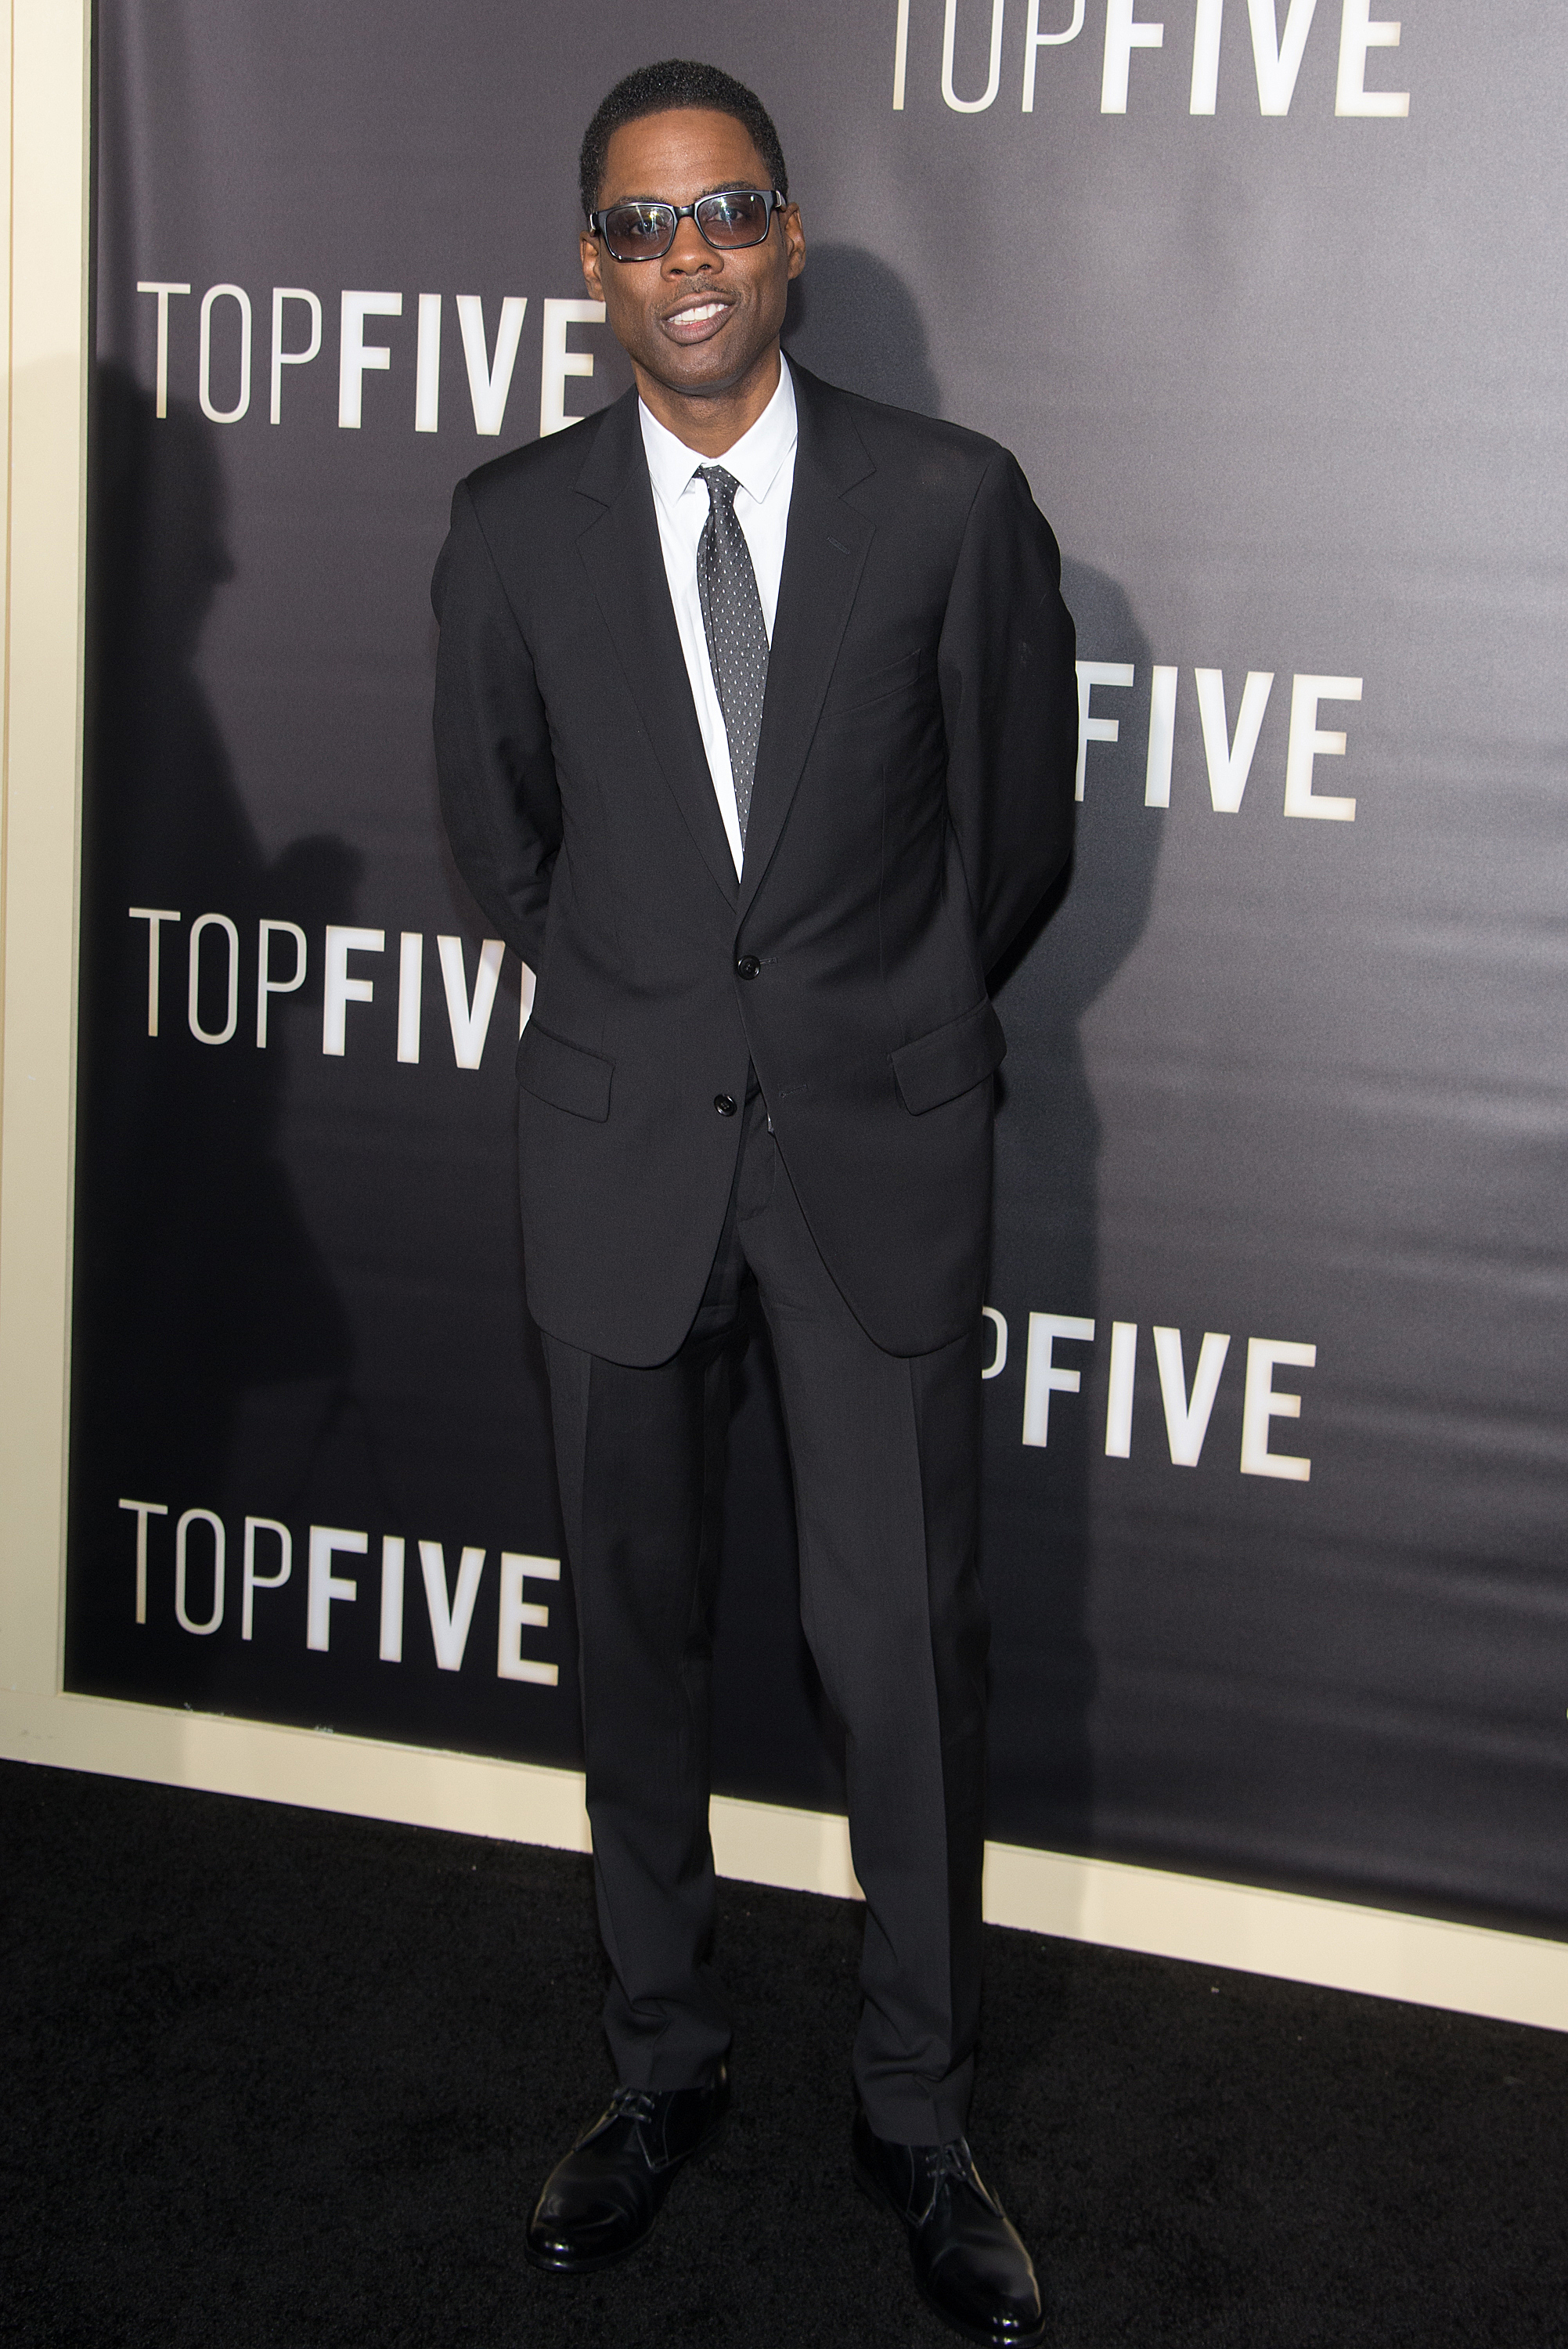 Chris Rock attends the "Top Five" premiere on Dec. 3, 2014 in New York City.